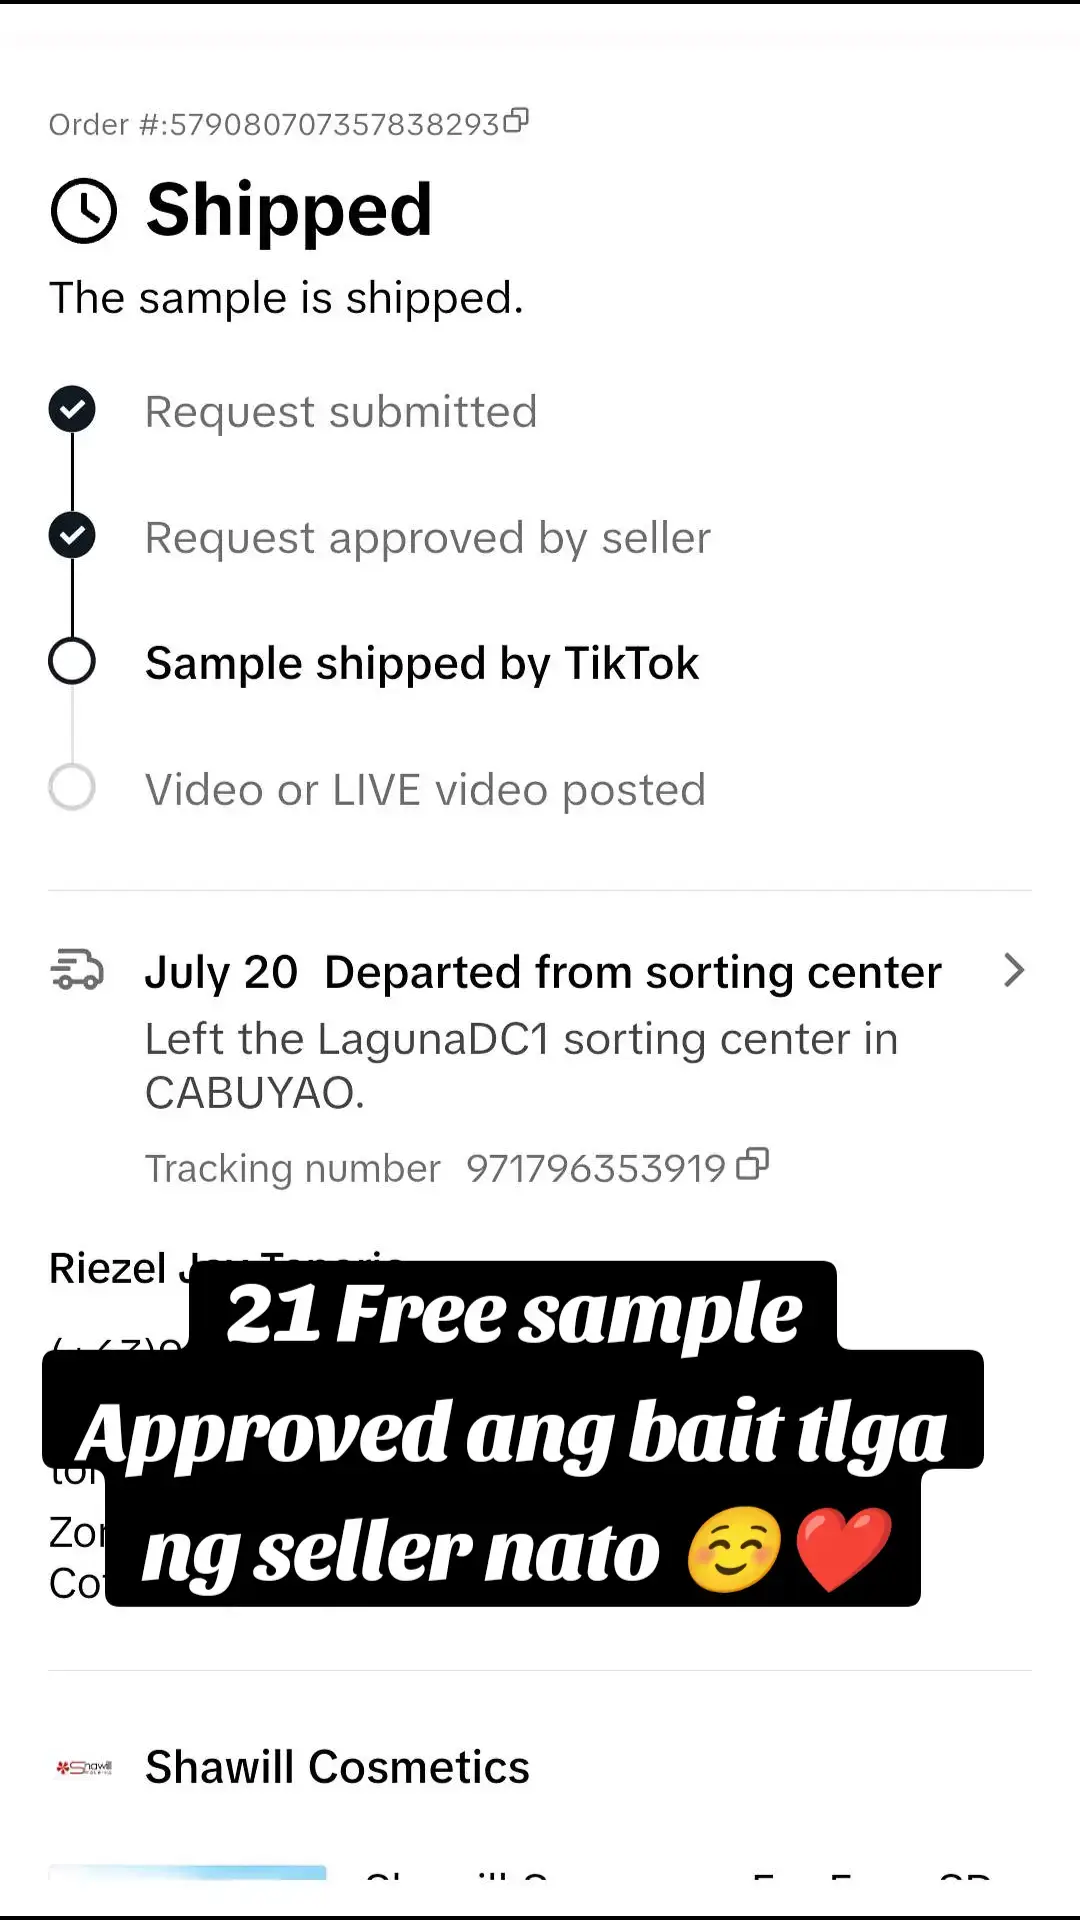 Another Free Sapmle Approved 😭❤️ #affiliate #tiktok #tiktokaffiliate #freesample #freesamplesapproved #freesamplestiktokshop #freesamplefornewaffiliate 